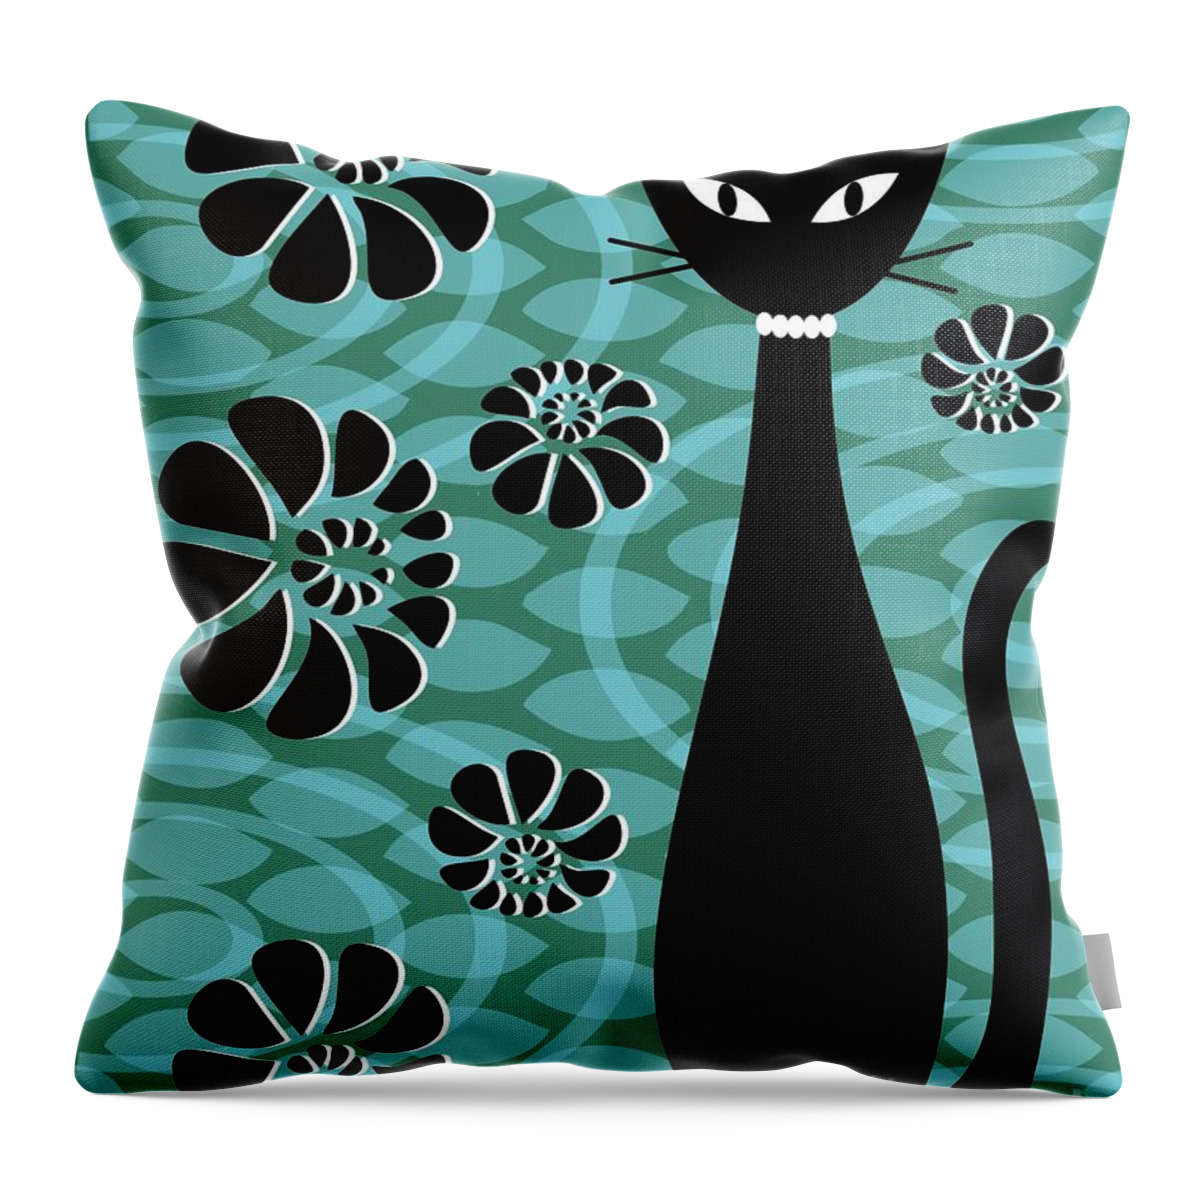 Abstract Cat Throw Pillow featuring the digital art Teal Mod Cat 2 by Donna Mibus